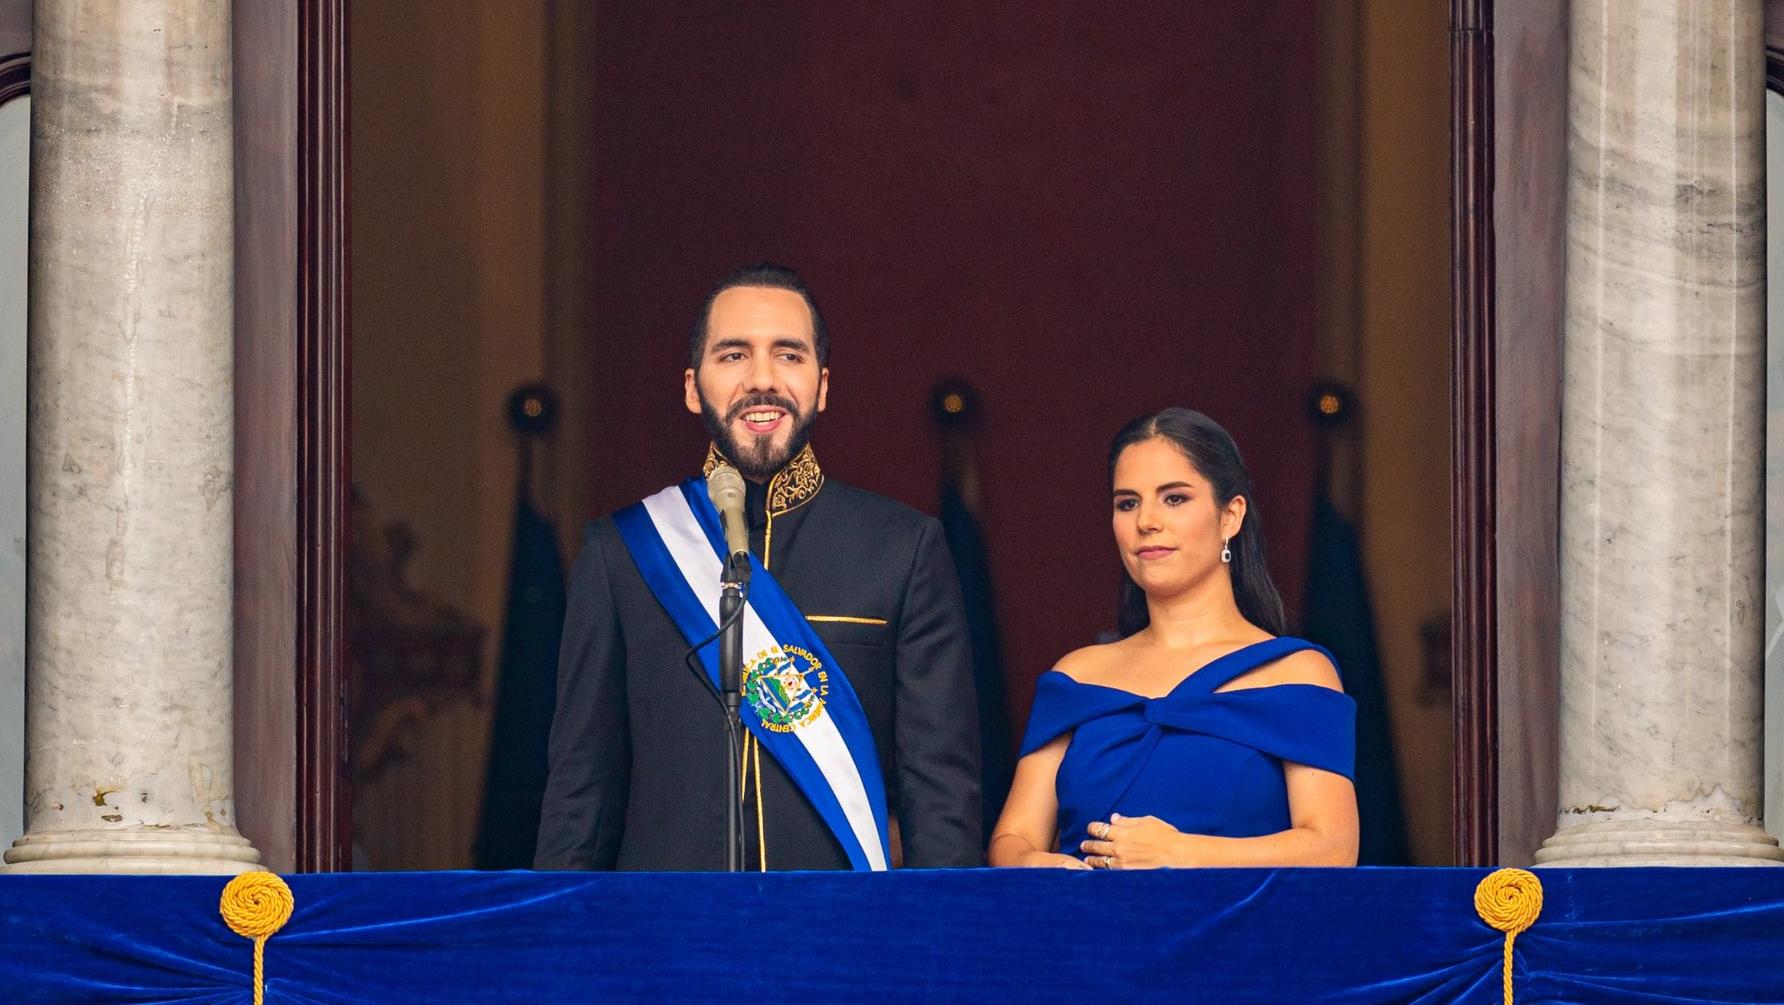 Bukele and his wife during the investiture ceremony in the National Palace, San Salvador.